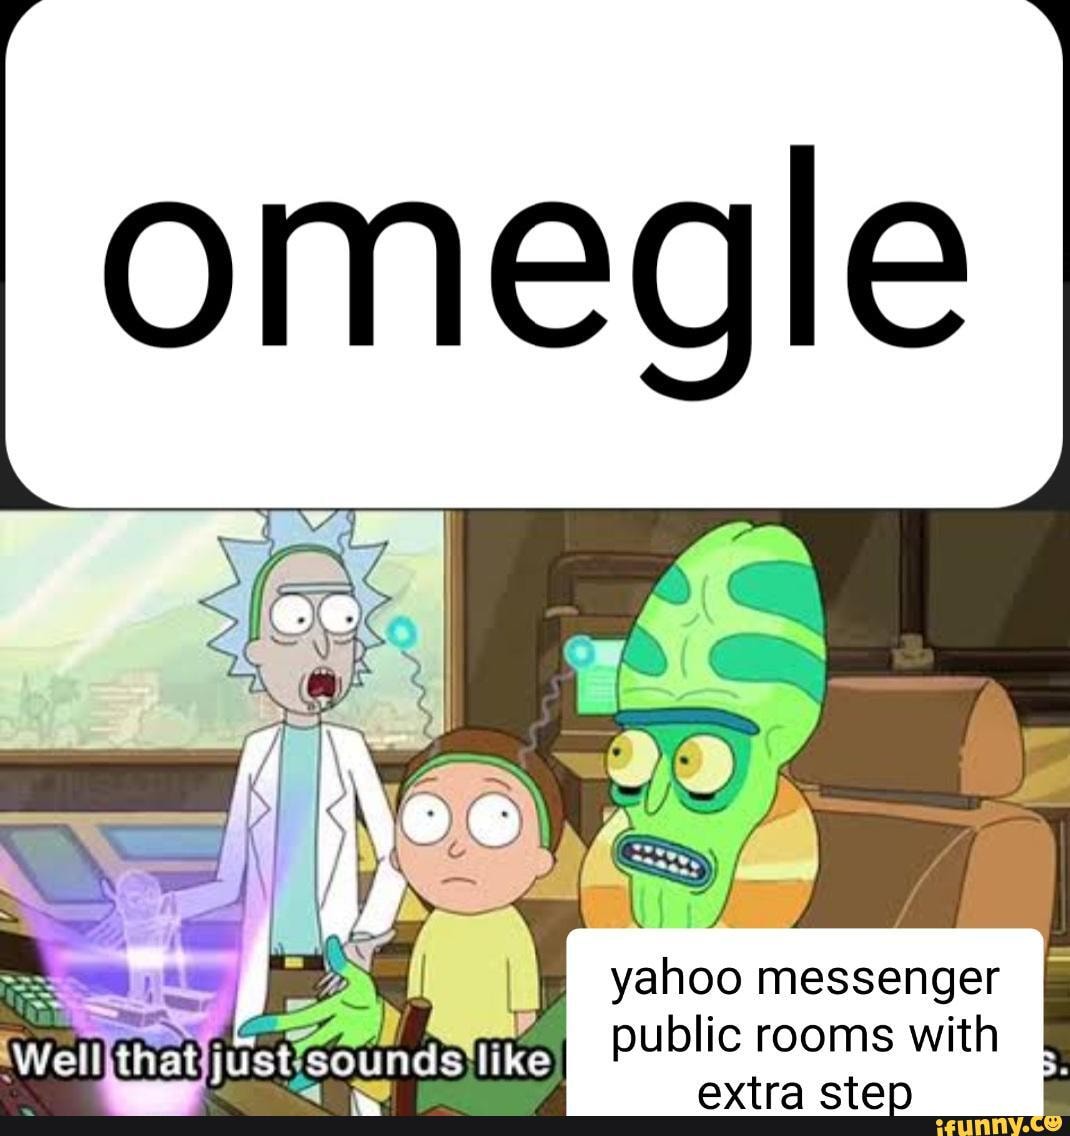 Omegle 'Nee yahoo messenger public rooms with atan Vieh the ity nS like -  